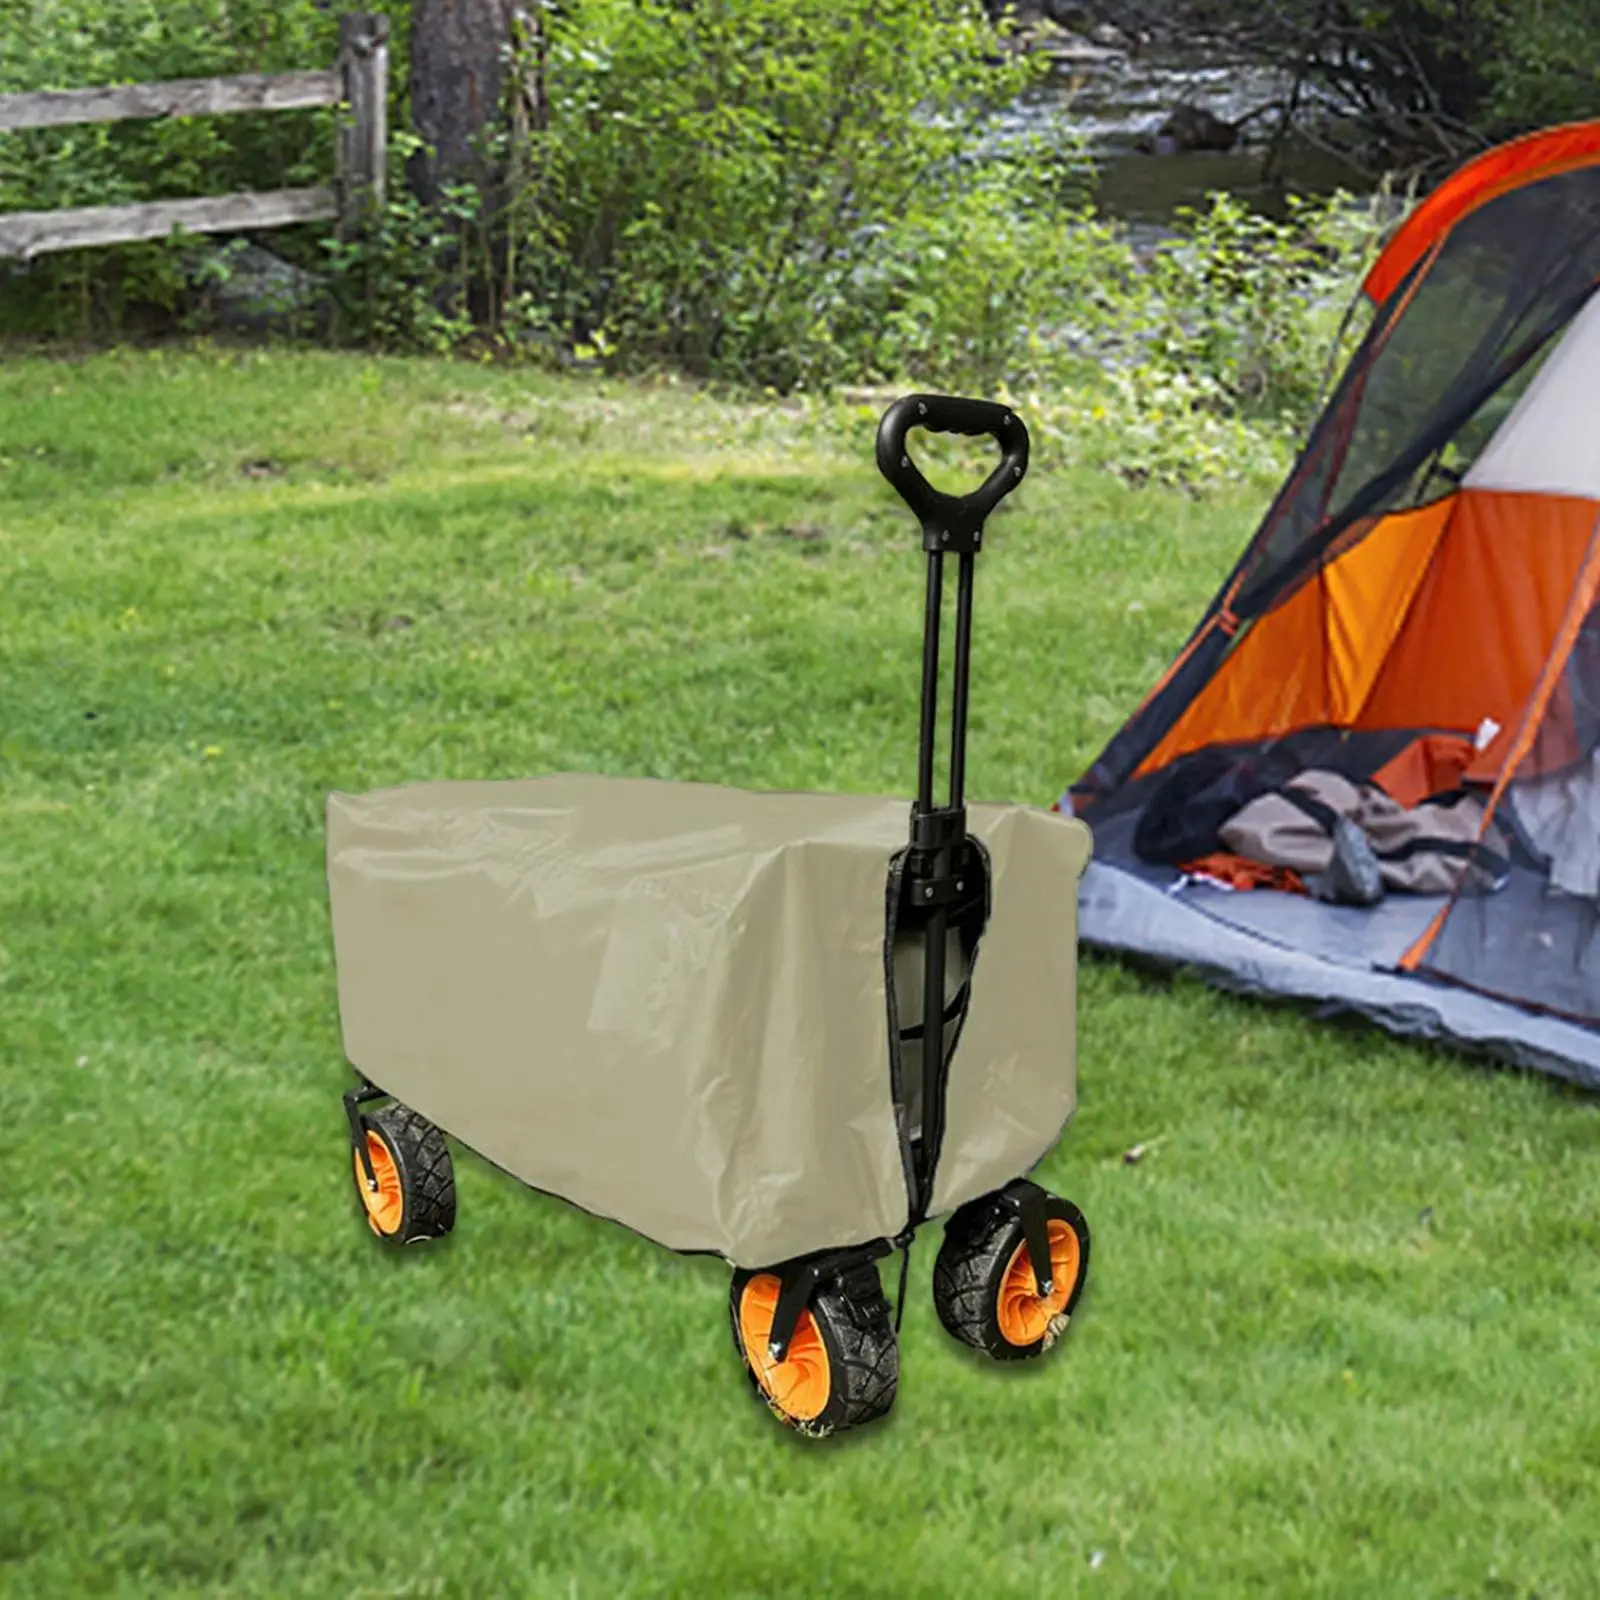 Outdoor Folding Wagon Cover Protective Cover 90x50x45cm Easily Install Weather Resistant Windproof for Collapsible Utility Wagon